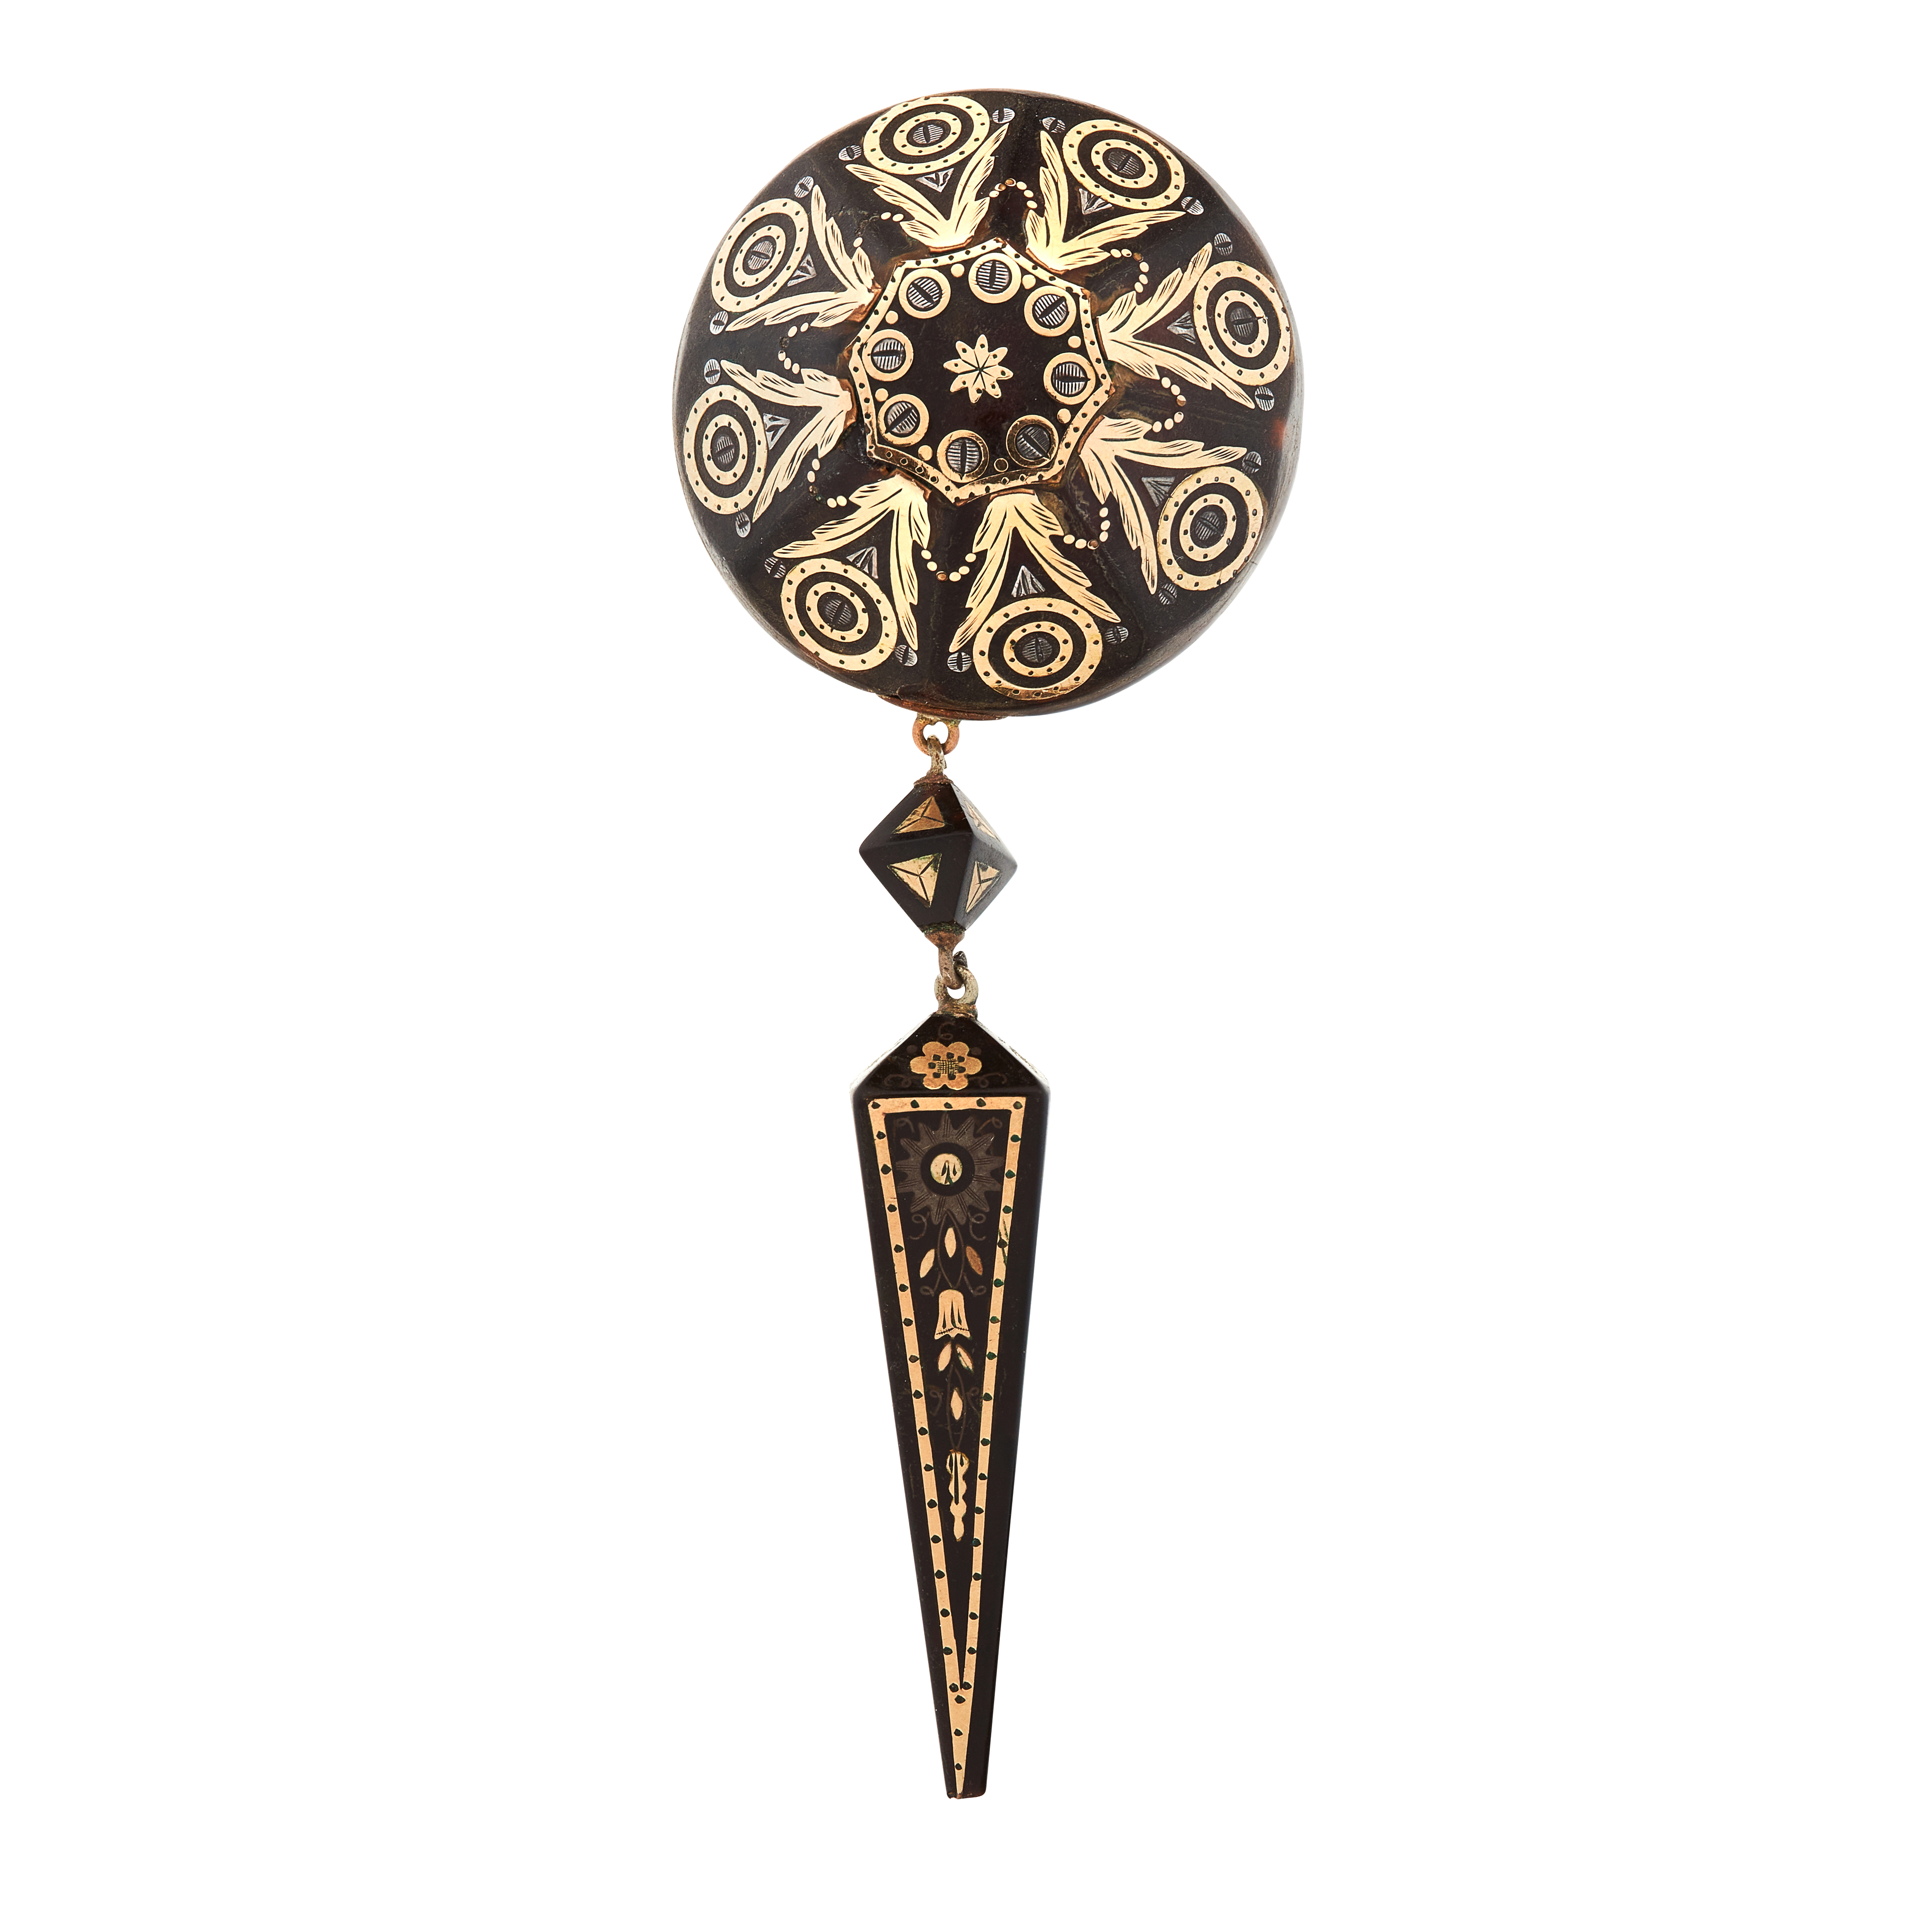 AN ANTIQUE TORTOISESHELL PIQUE BROOCH, 19TH CENTURY in yellow gold and silver, the body formed of